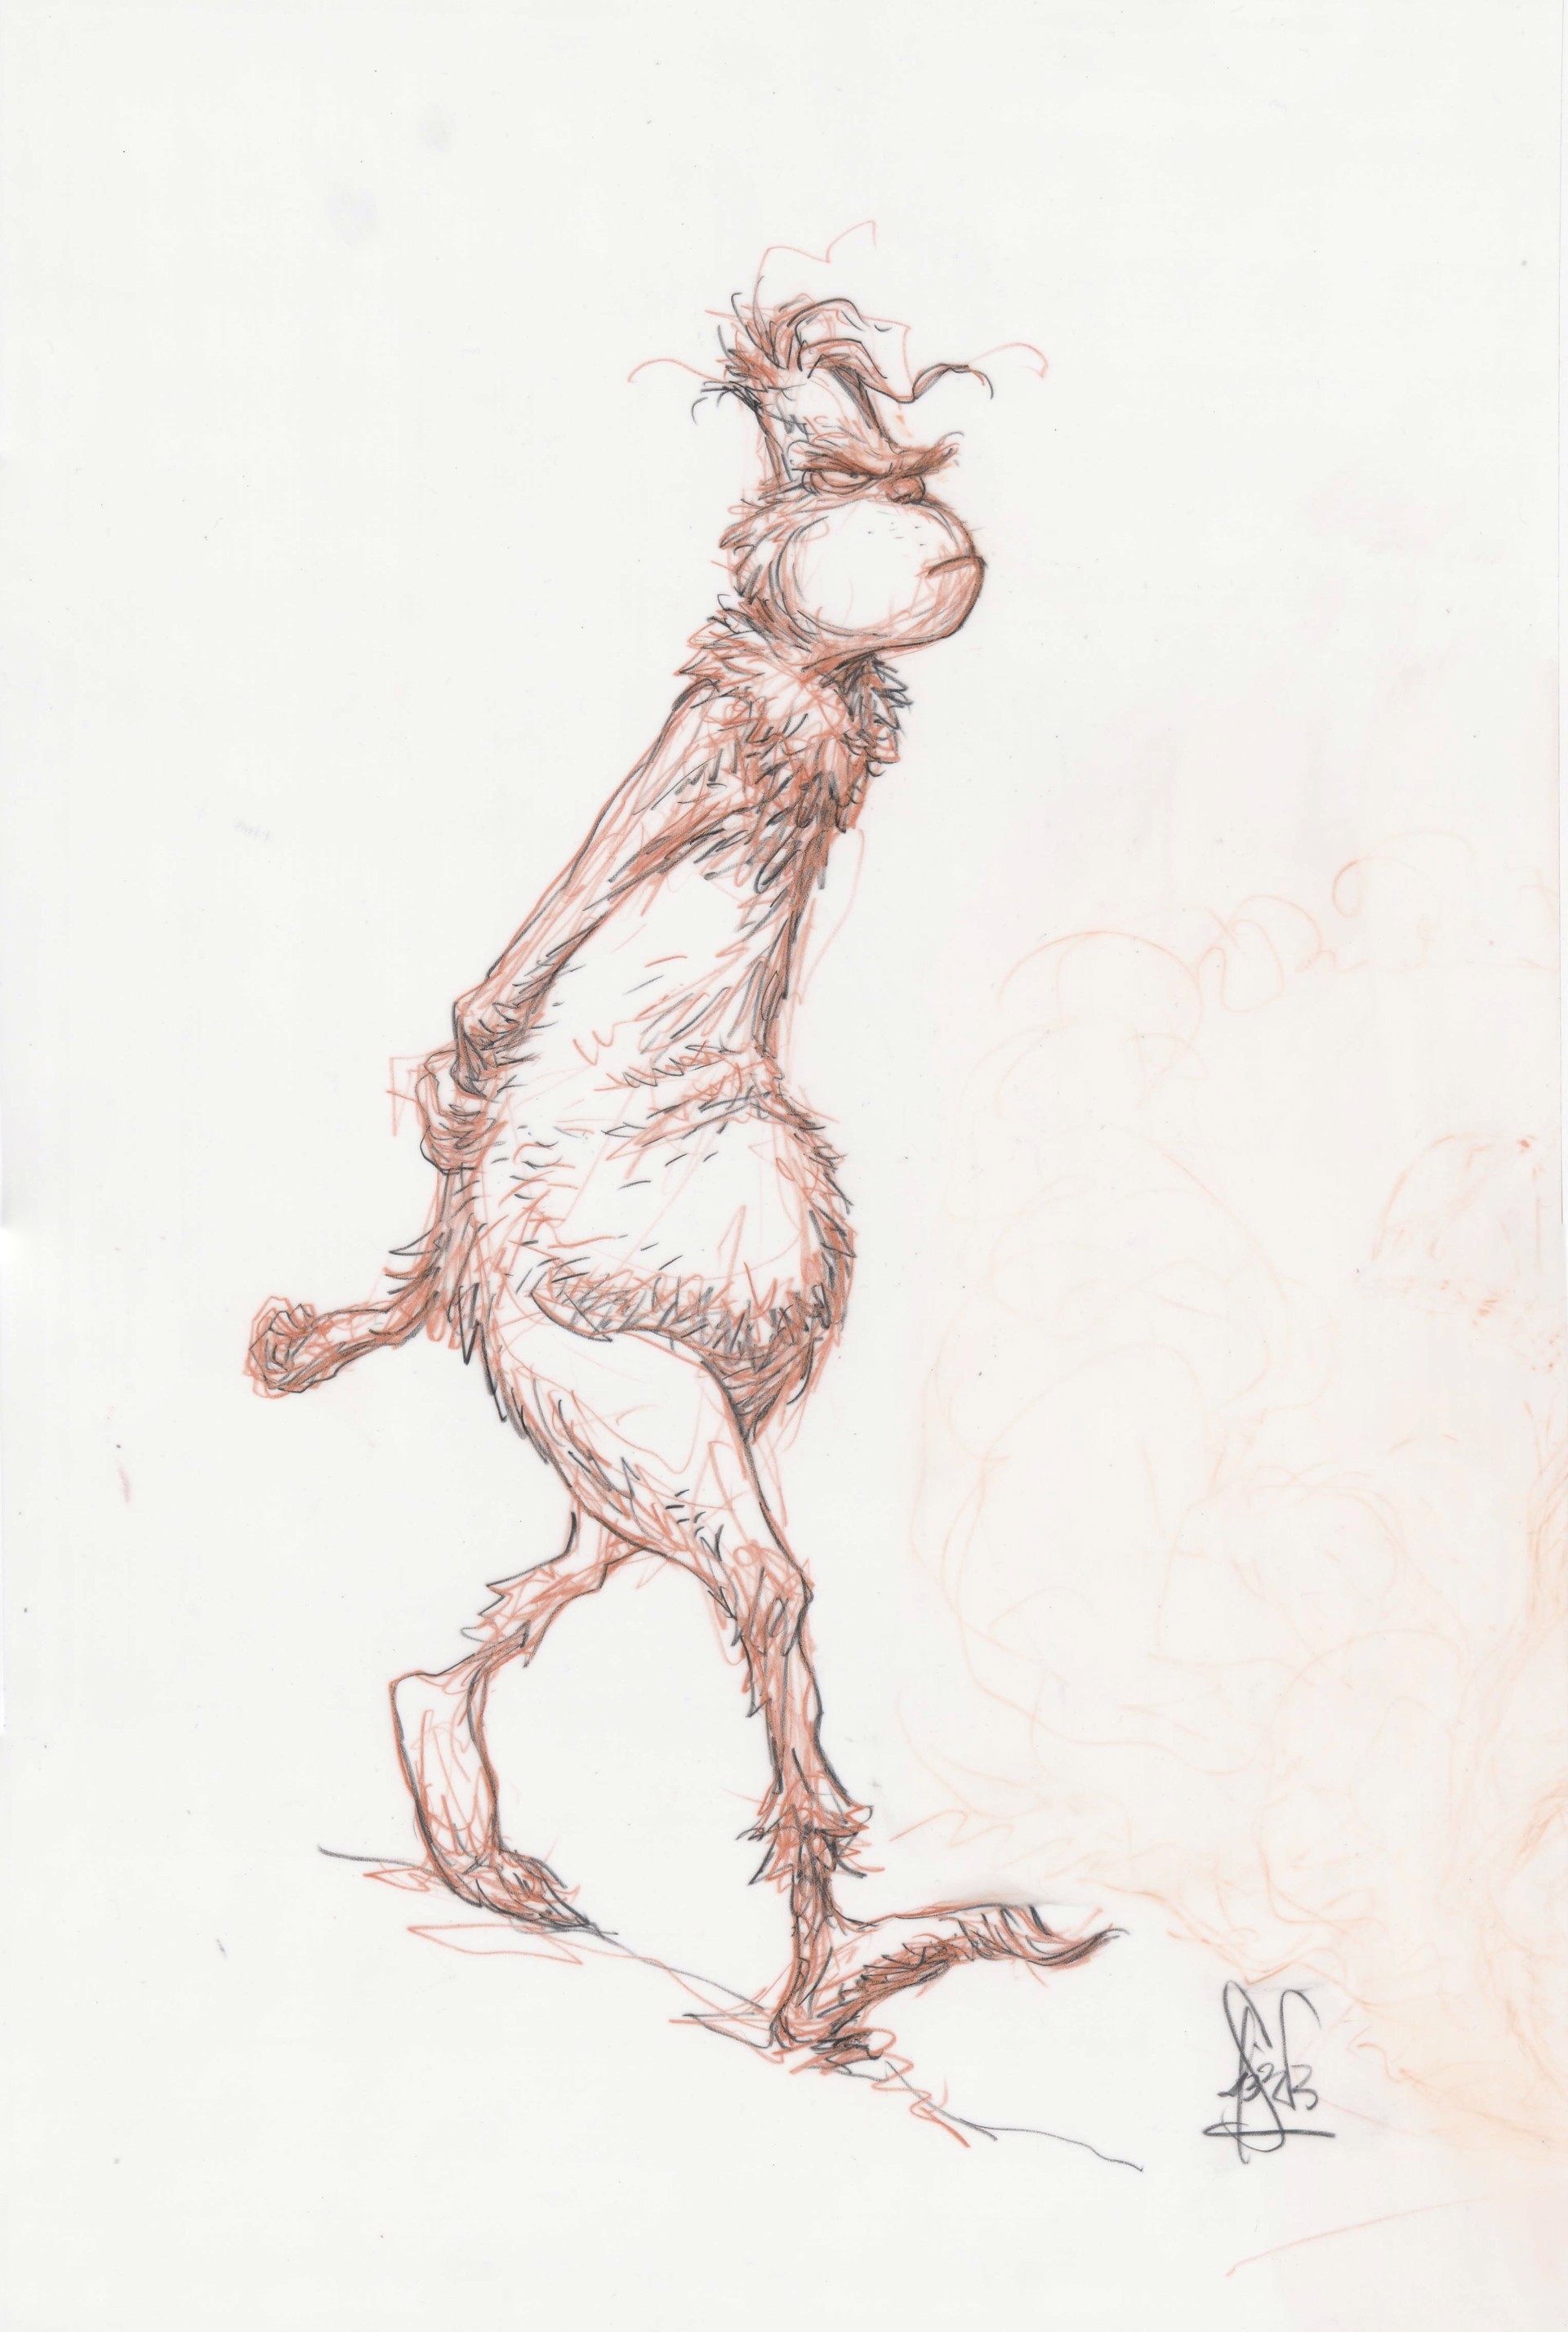 Grinch early character study by Peter de Sève